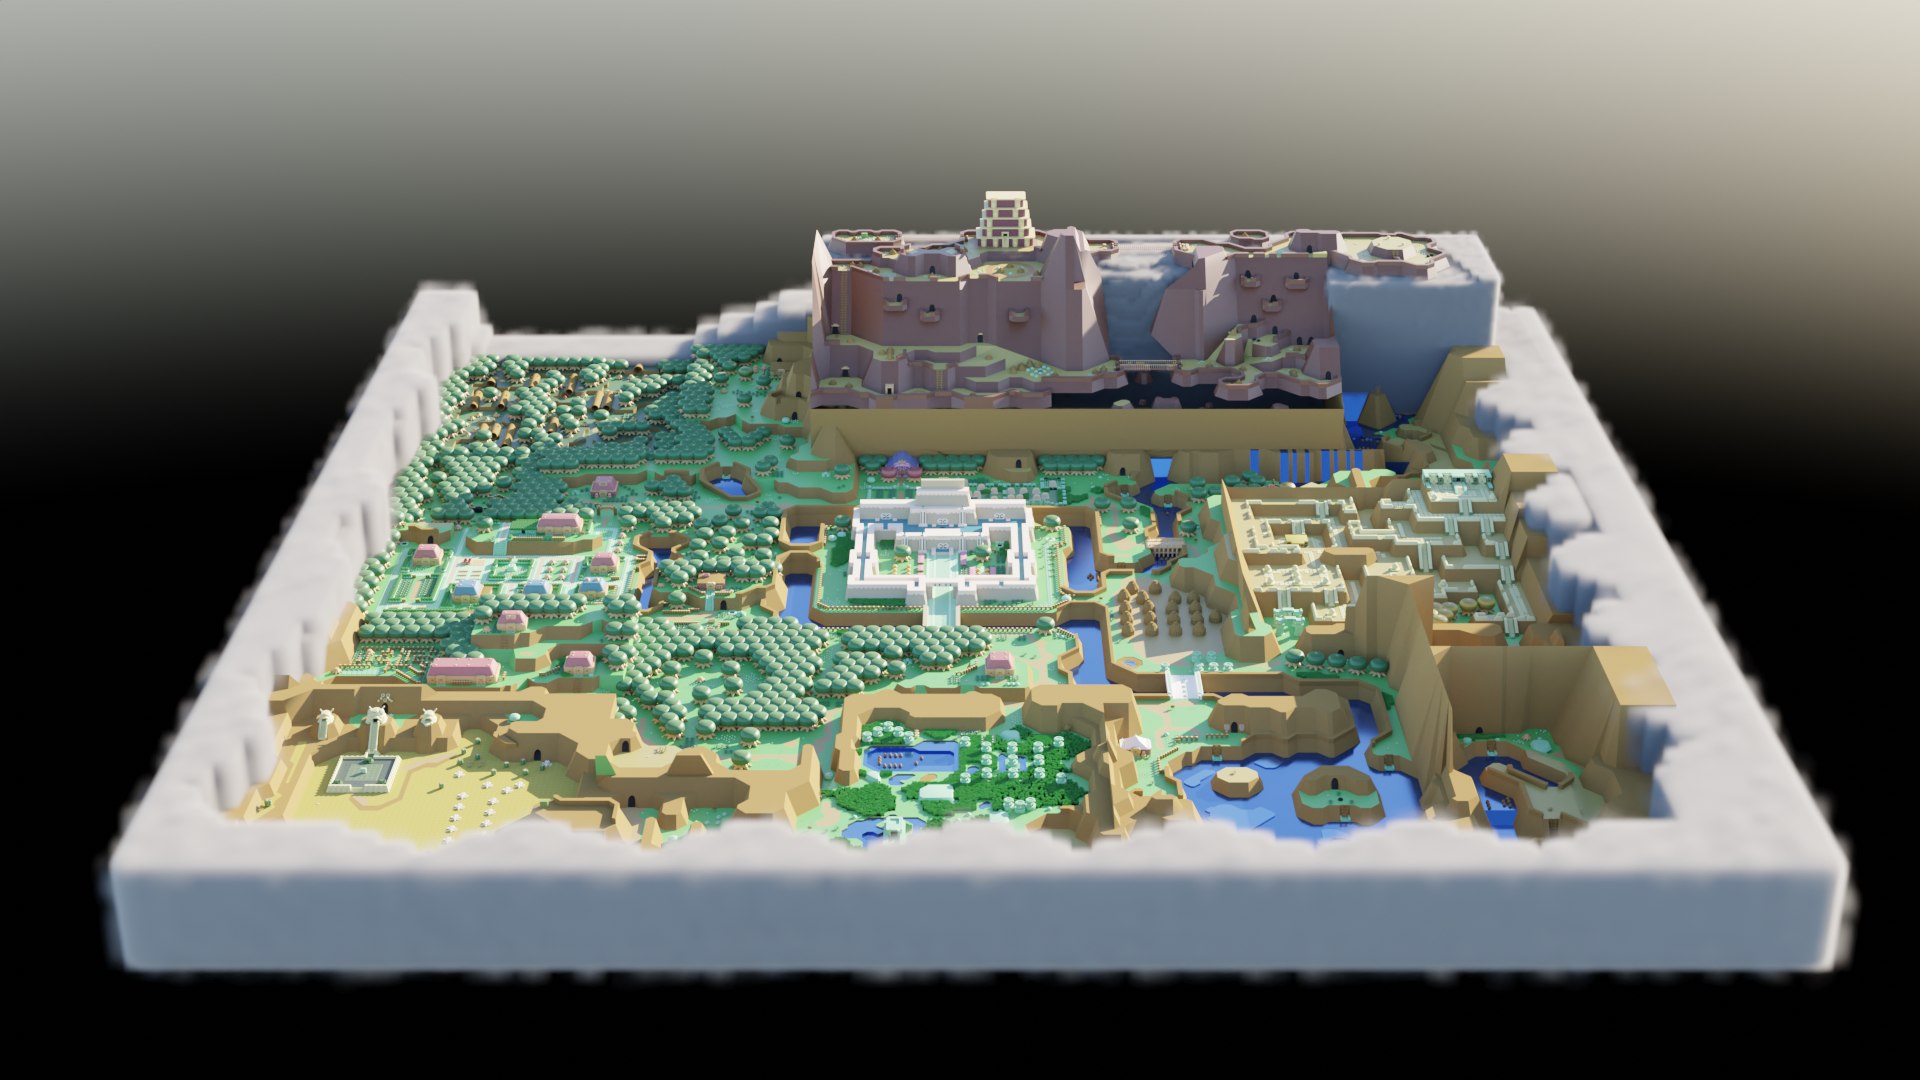 The Legend Of Zelda A Link To The Past World Map Model - Turbosquid 1858751